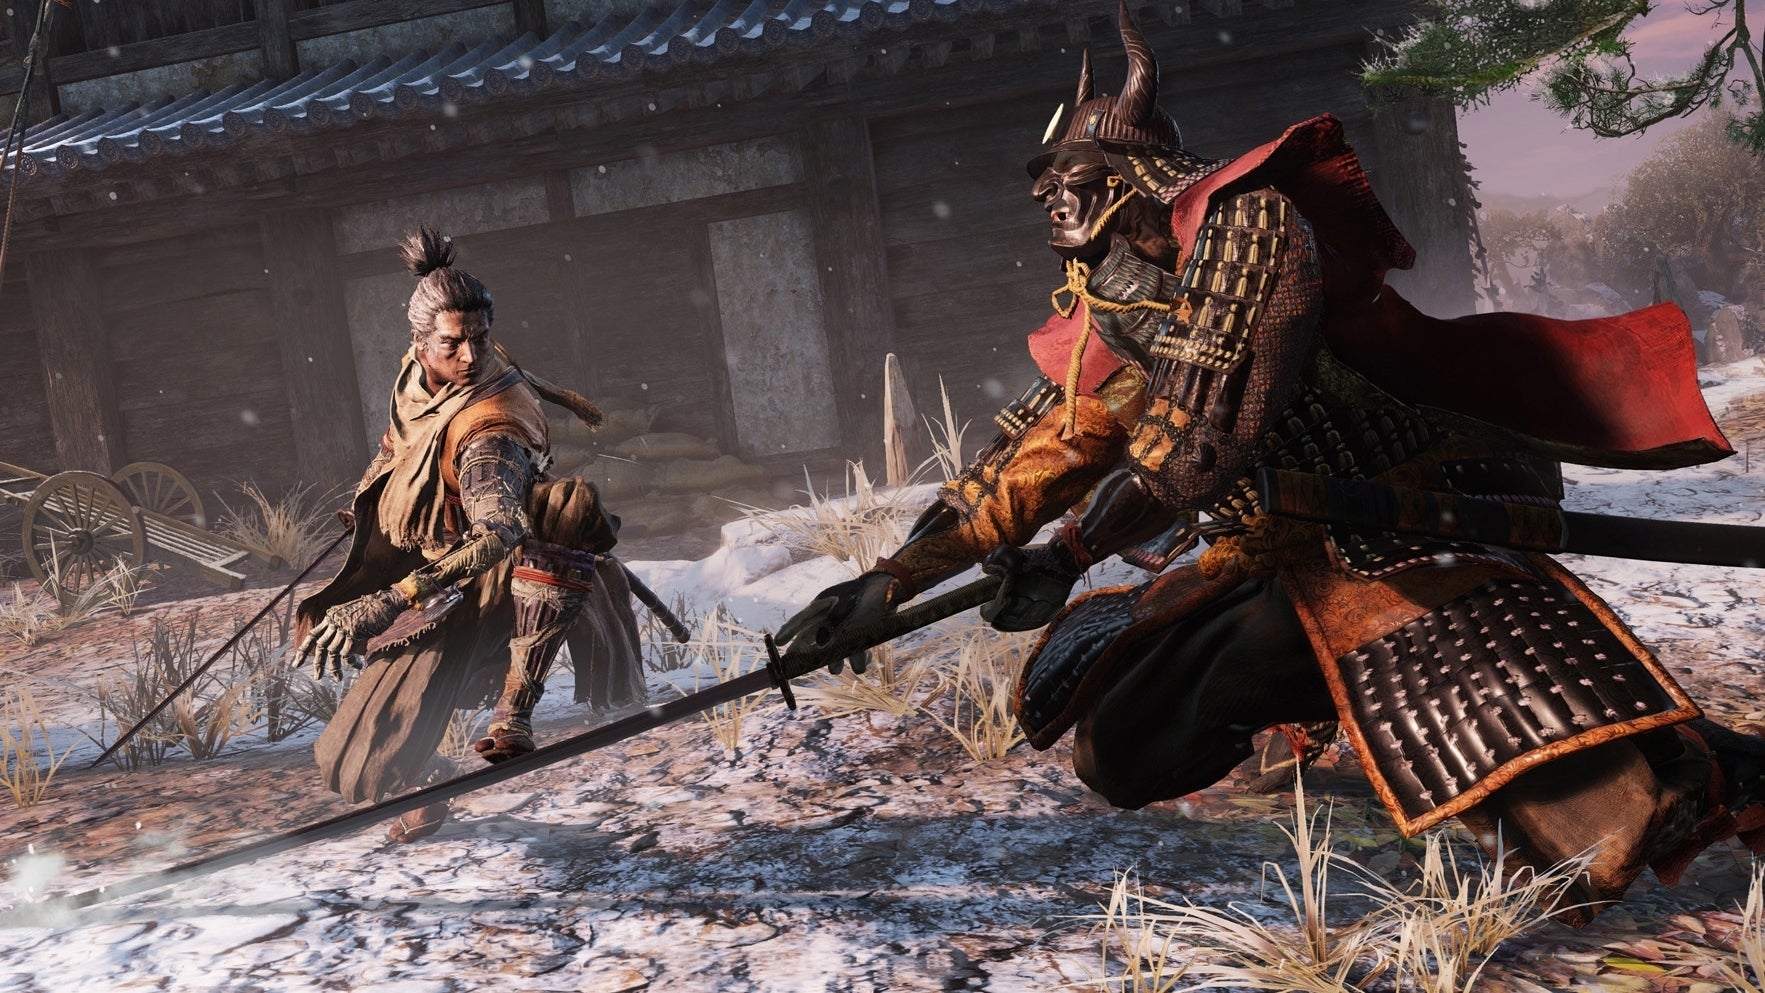 Image for This Sekiro mod lets you play co-op and PVP with your friends